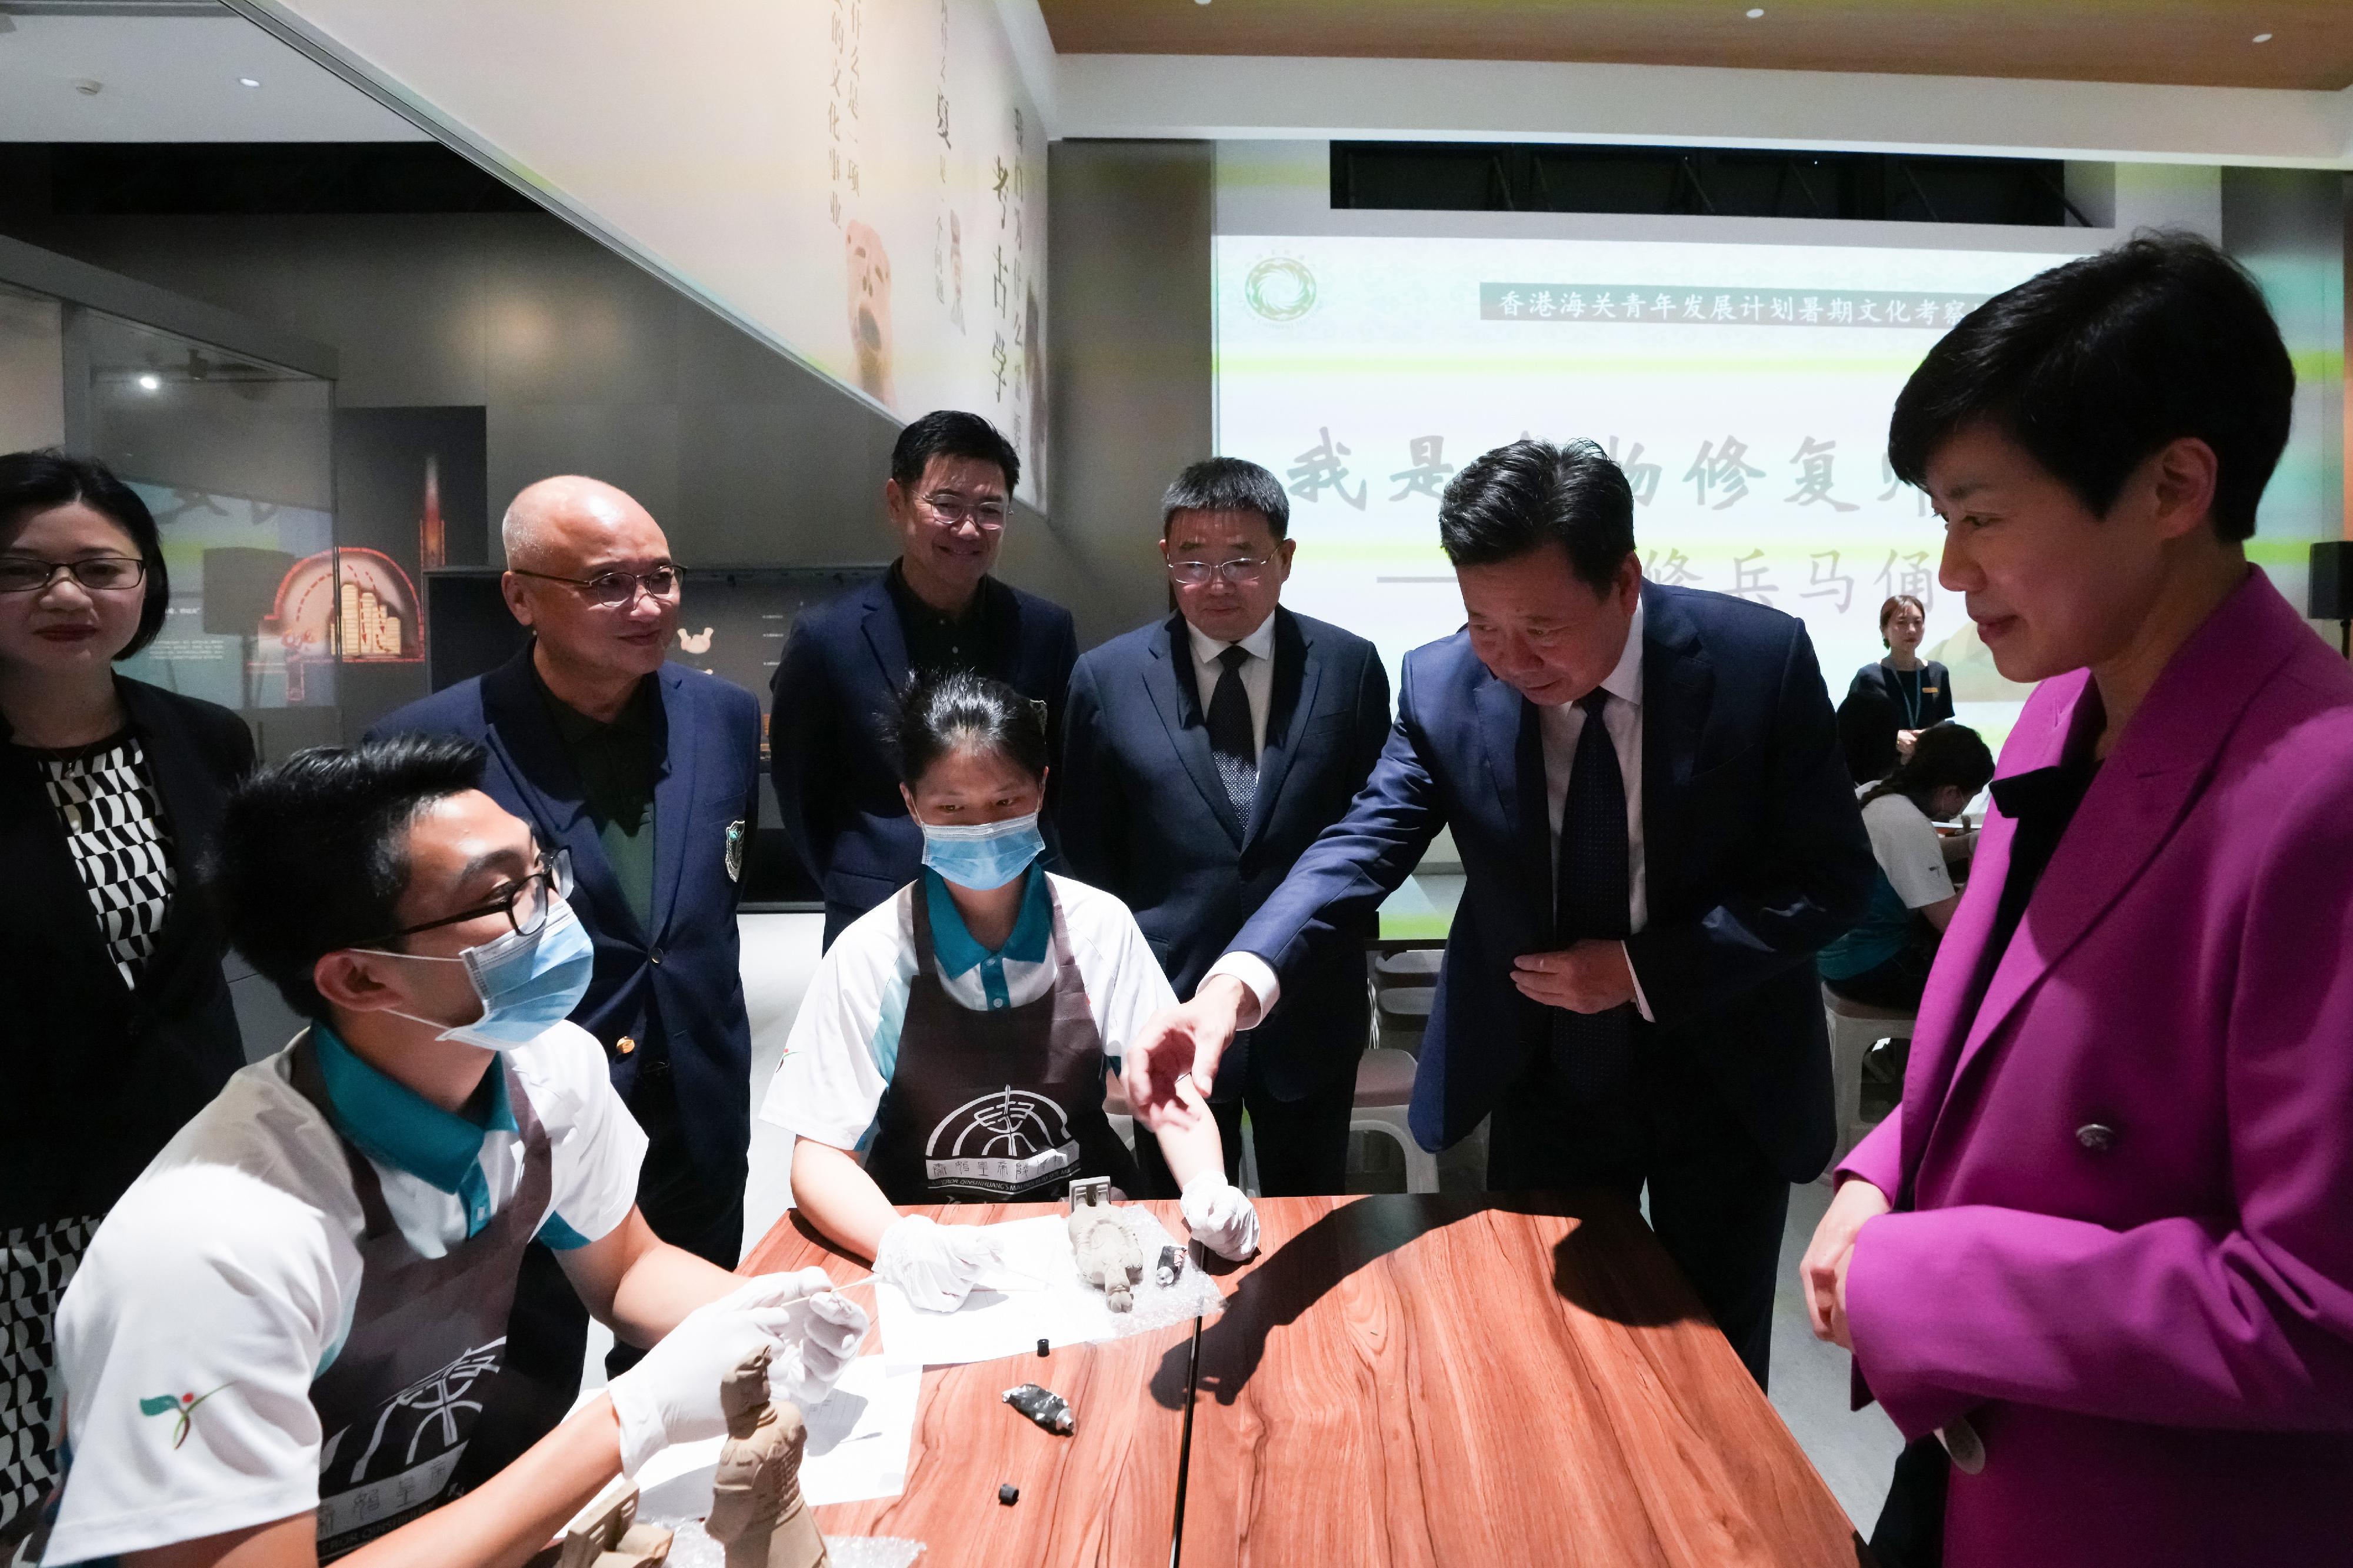 The Commissioner of Customs and Excise, Ms Louise Ho (first right),and the Vice-Minister of the Ministry of Culture and Tourism and Administrator of the National Cultural Heritage Administration, Mr Li Qun (second right), on July 10 interacted with members of “Customs YES” in the Shaanxi History Museum. Mr Li also shared how the museum conformed to the national policy of heritage conservation with the members.